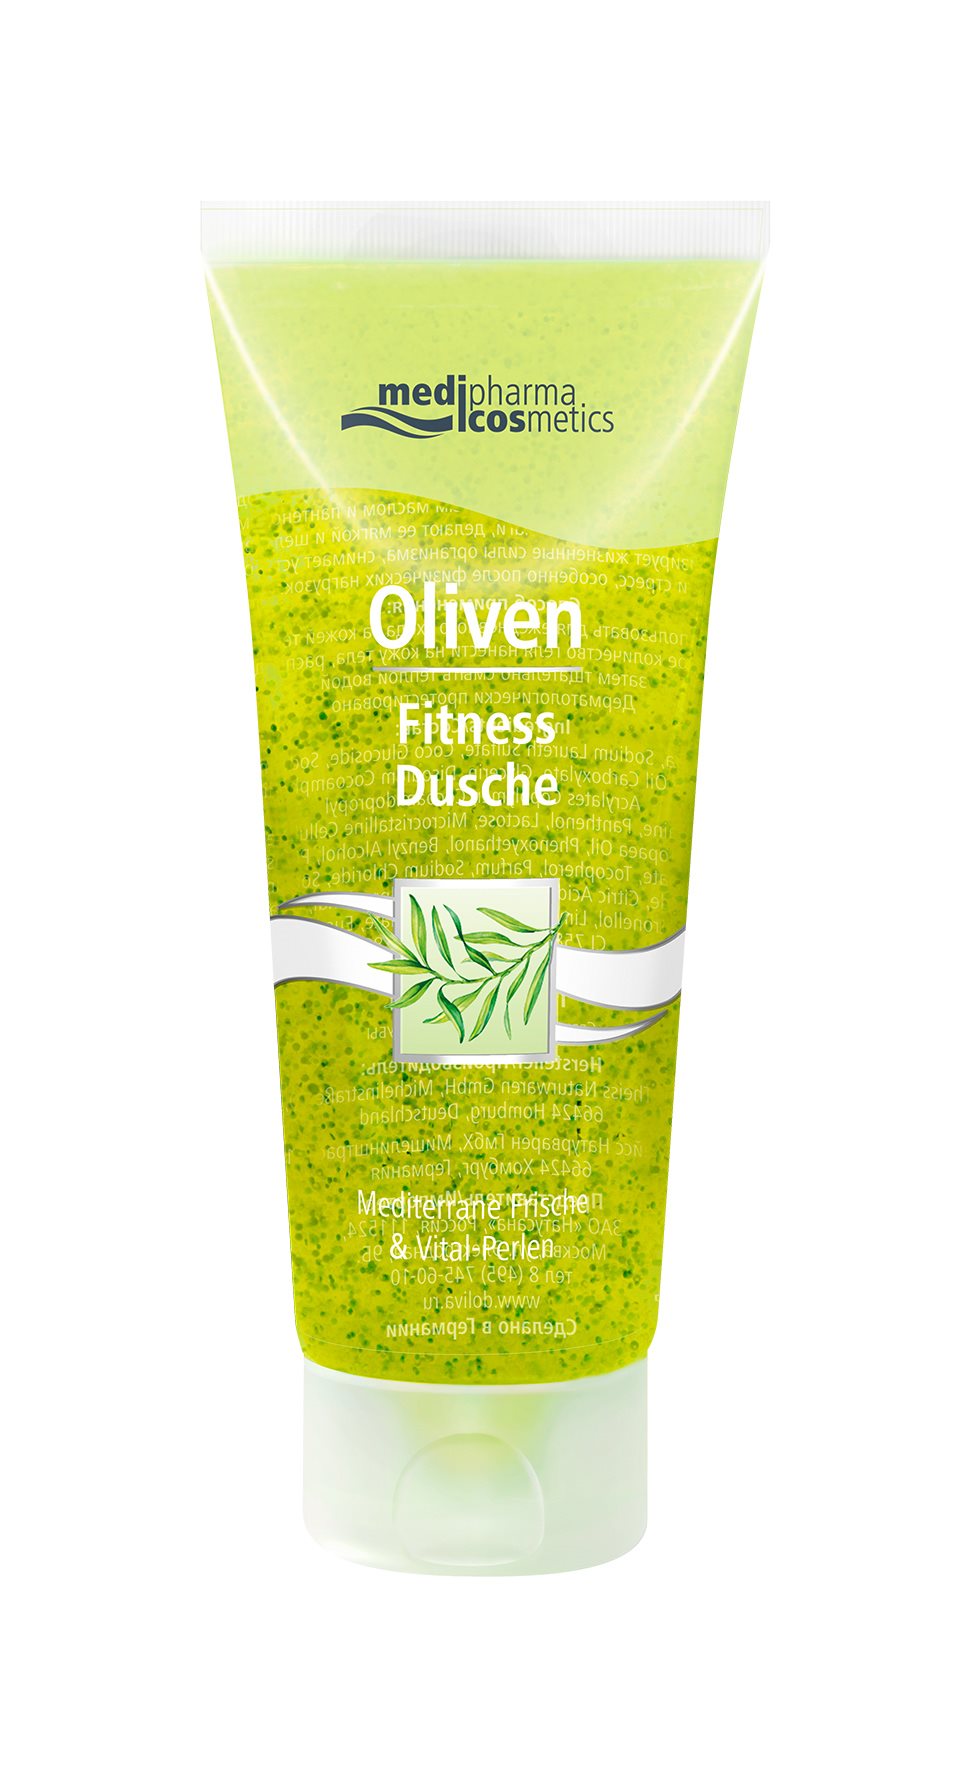 medipharma-cosmetics-Oliven-Fitness-Dusche